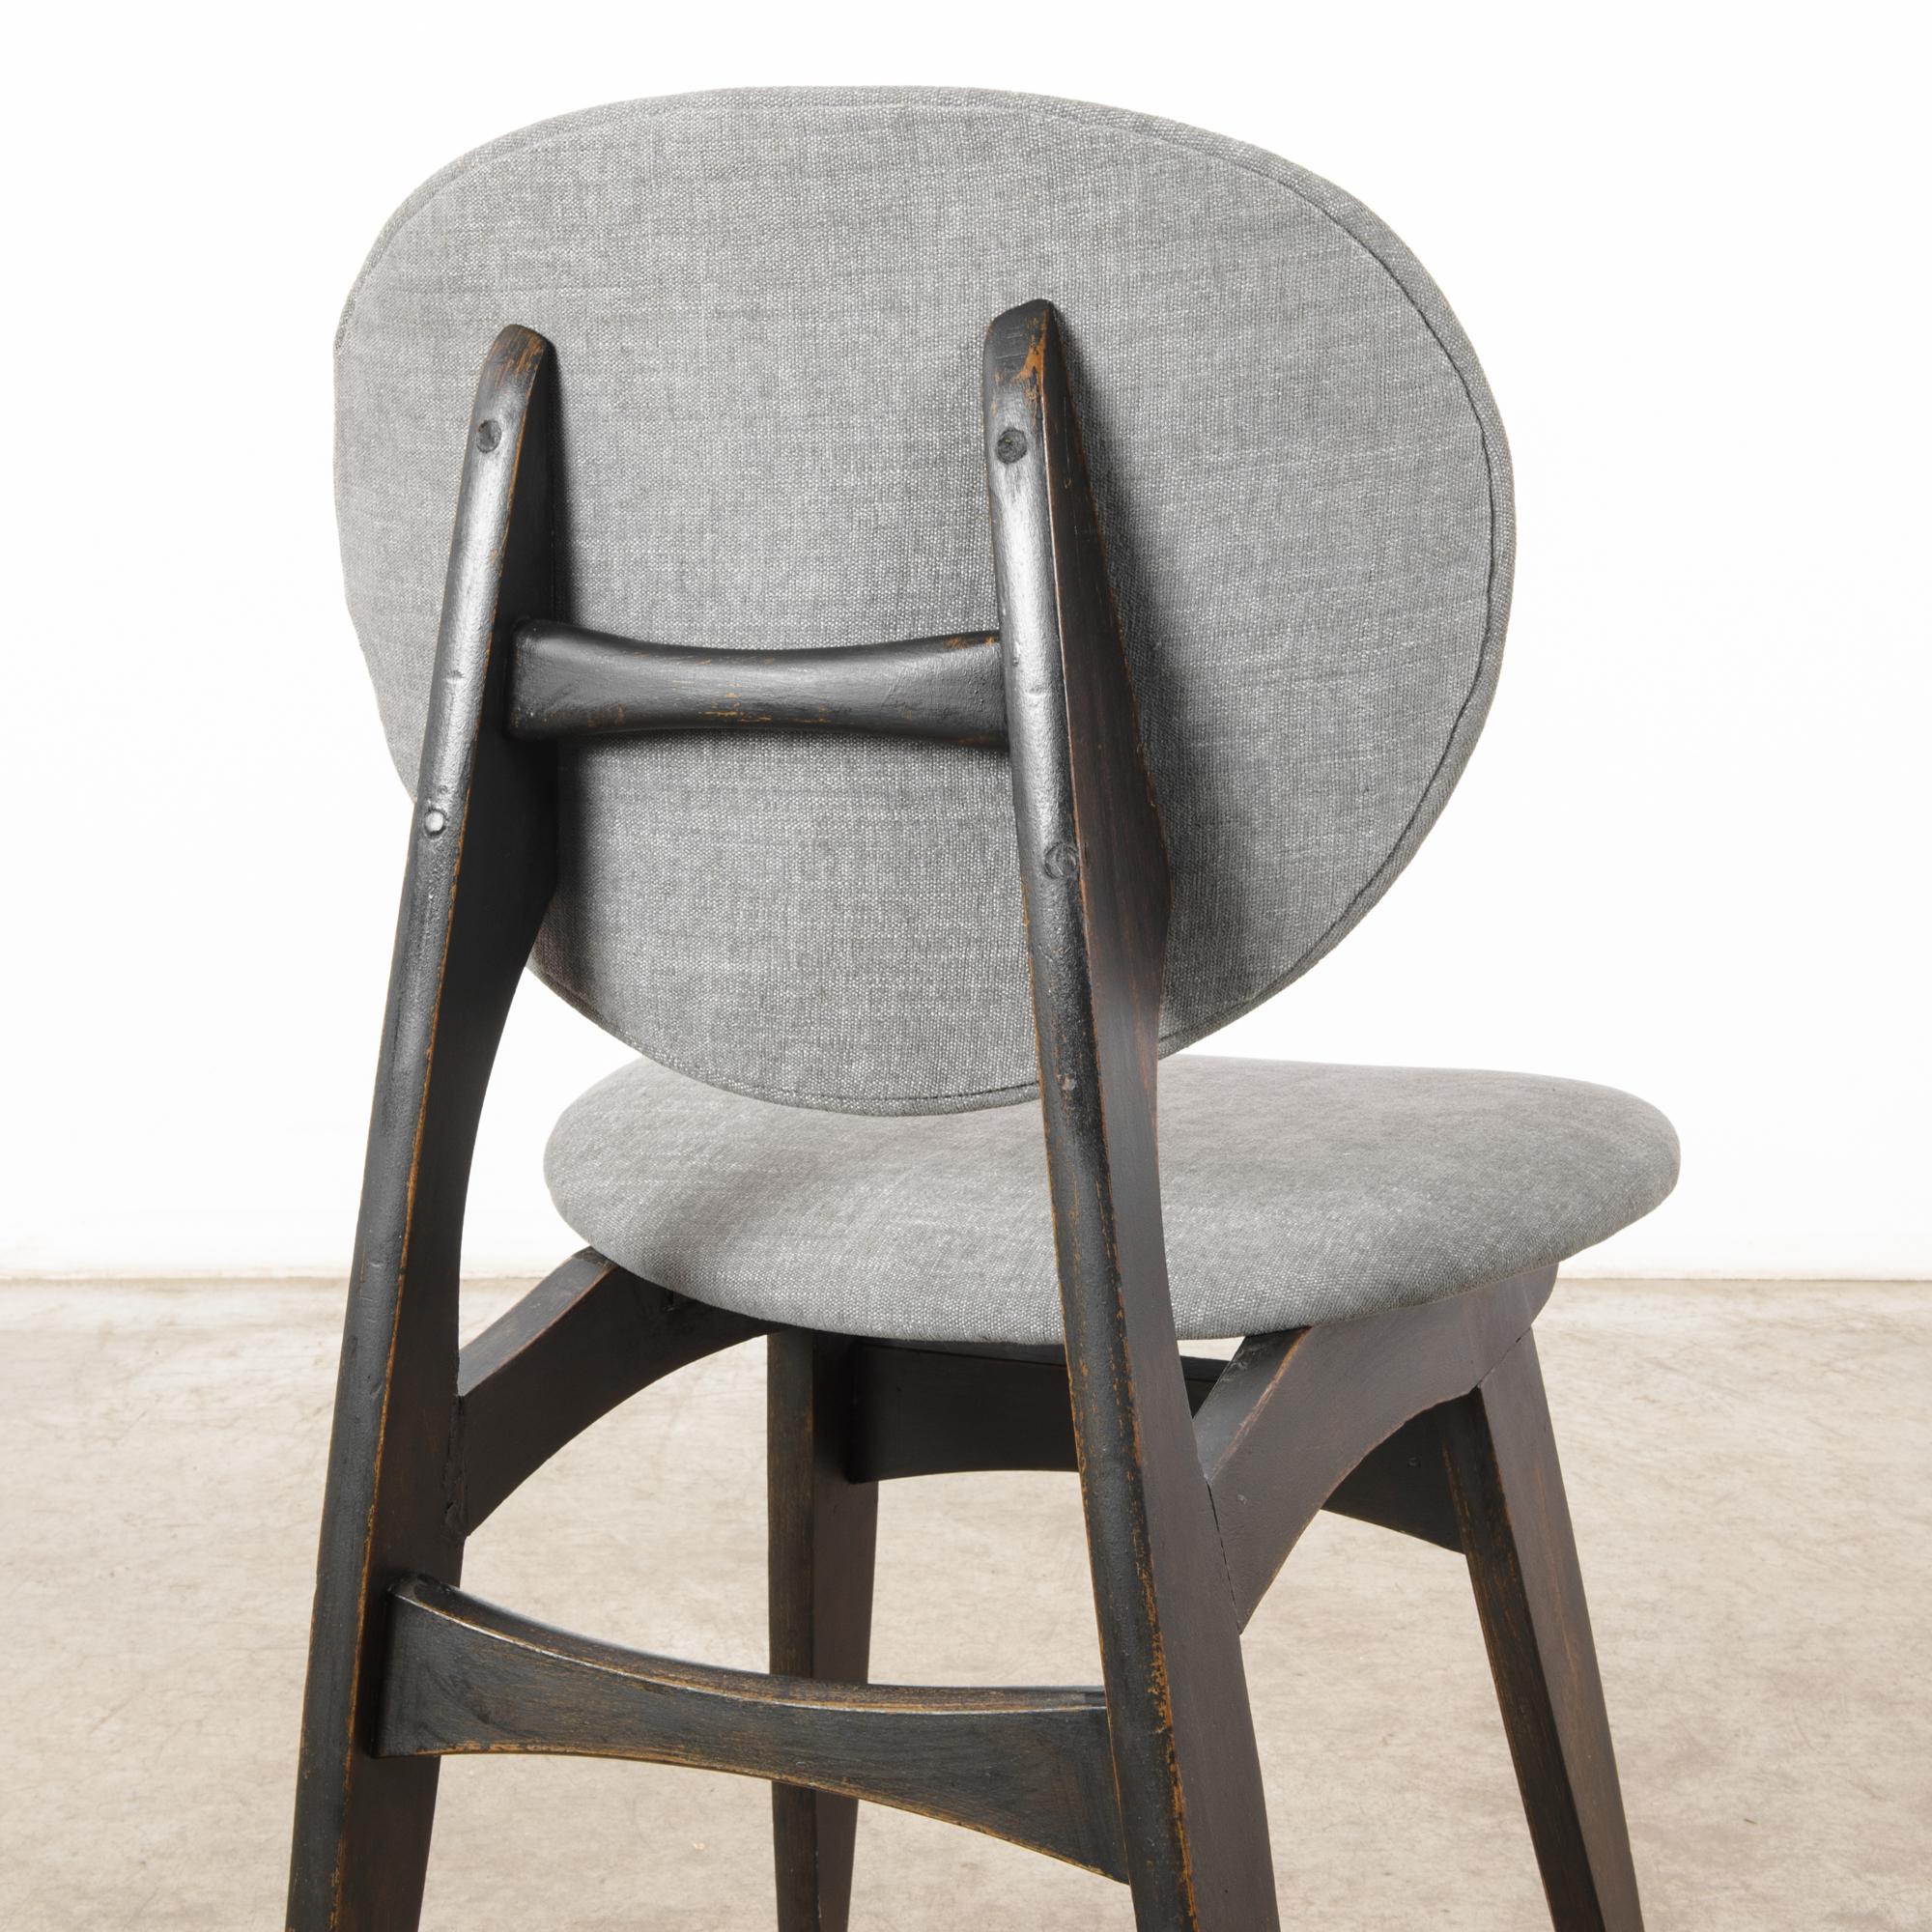 1960s Danish Wooden Chair with Upholstered Seat and Back 9